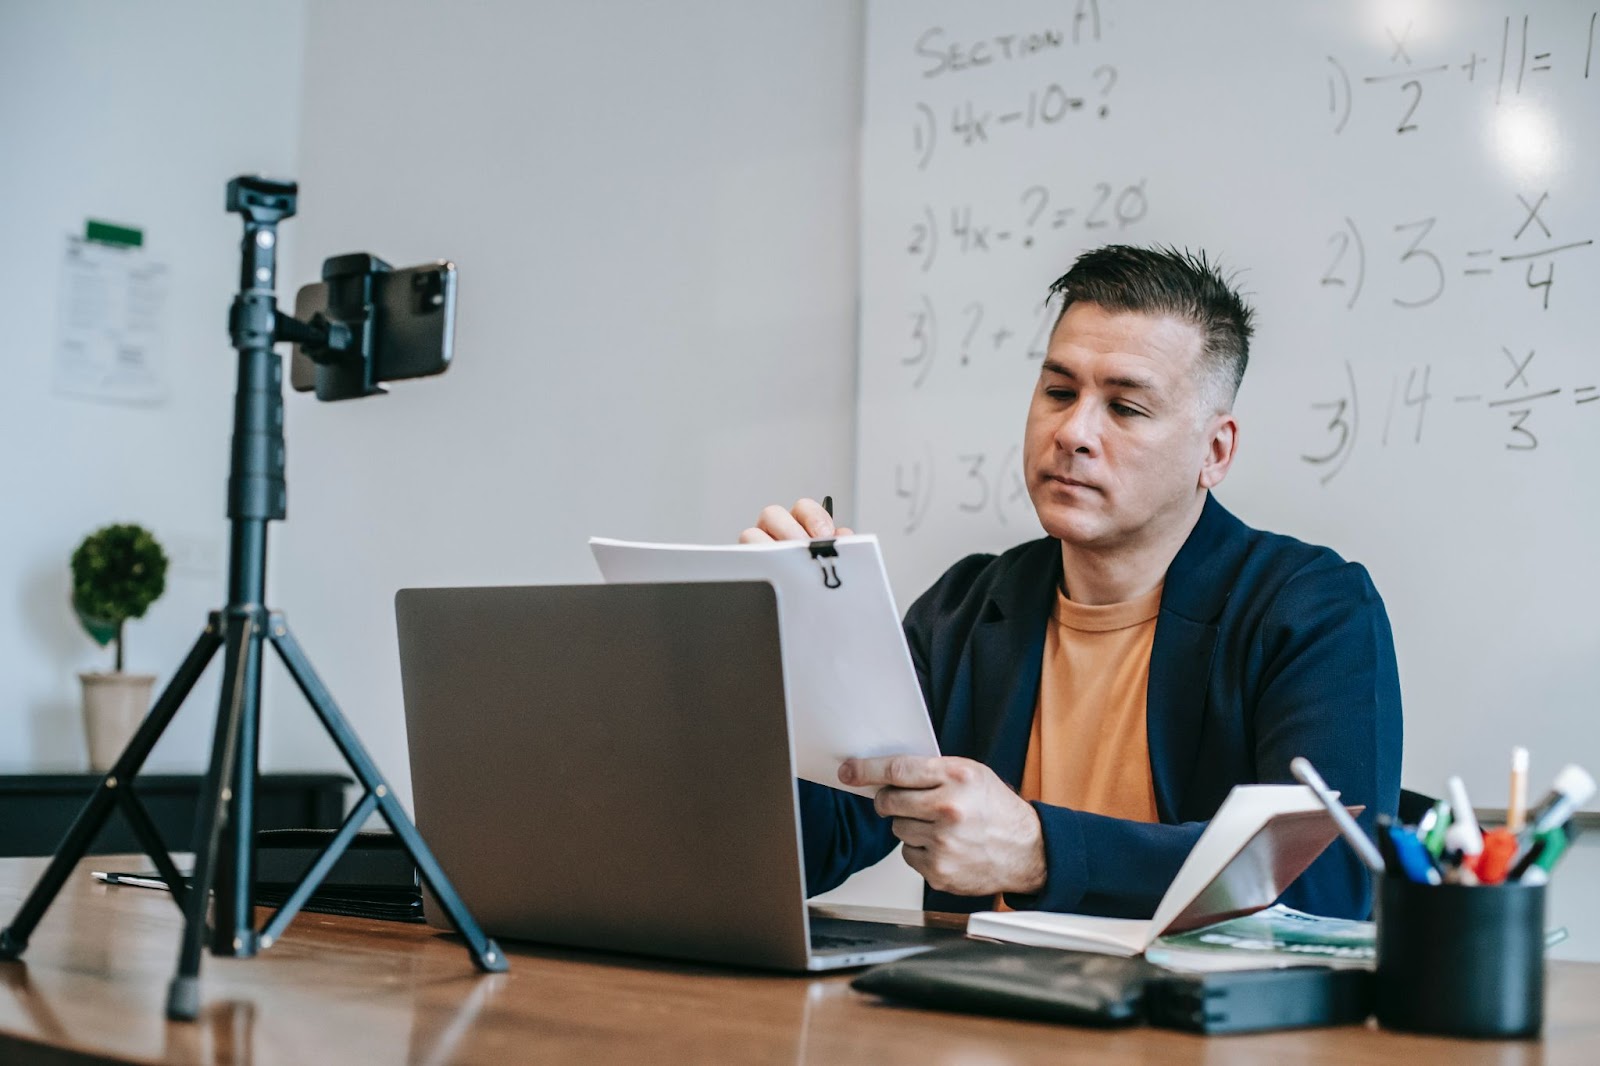 Man at Desk Reading Papers with WhiteBoard Behind Him